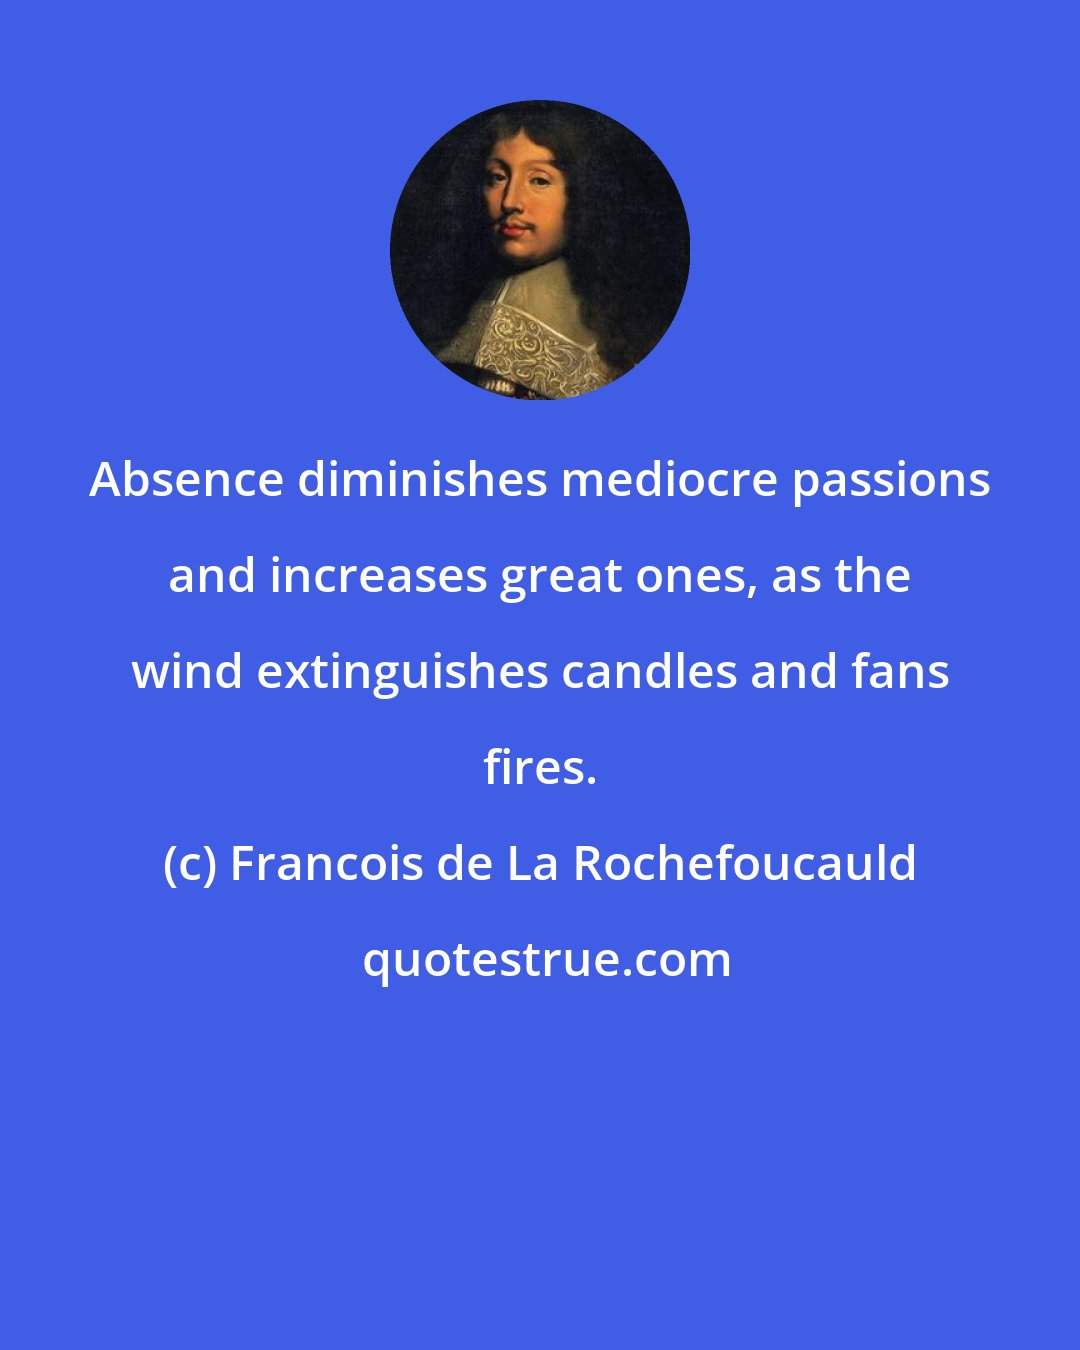 Francois de La Rochefoucauld: Absence diminishes mediocre passions and increases great ones, as the wind extinguishes candles and fans fires.